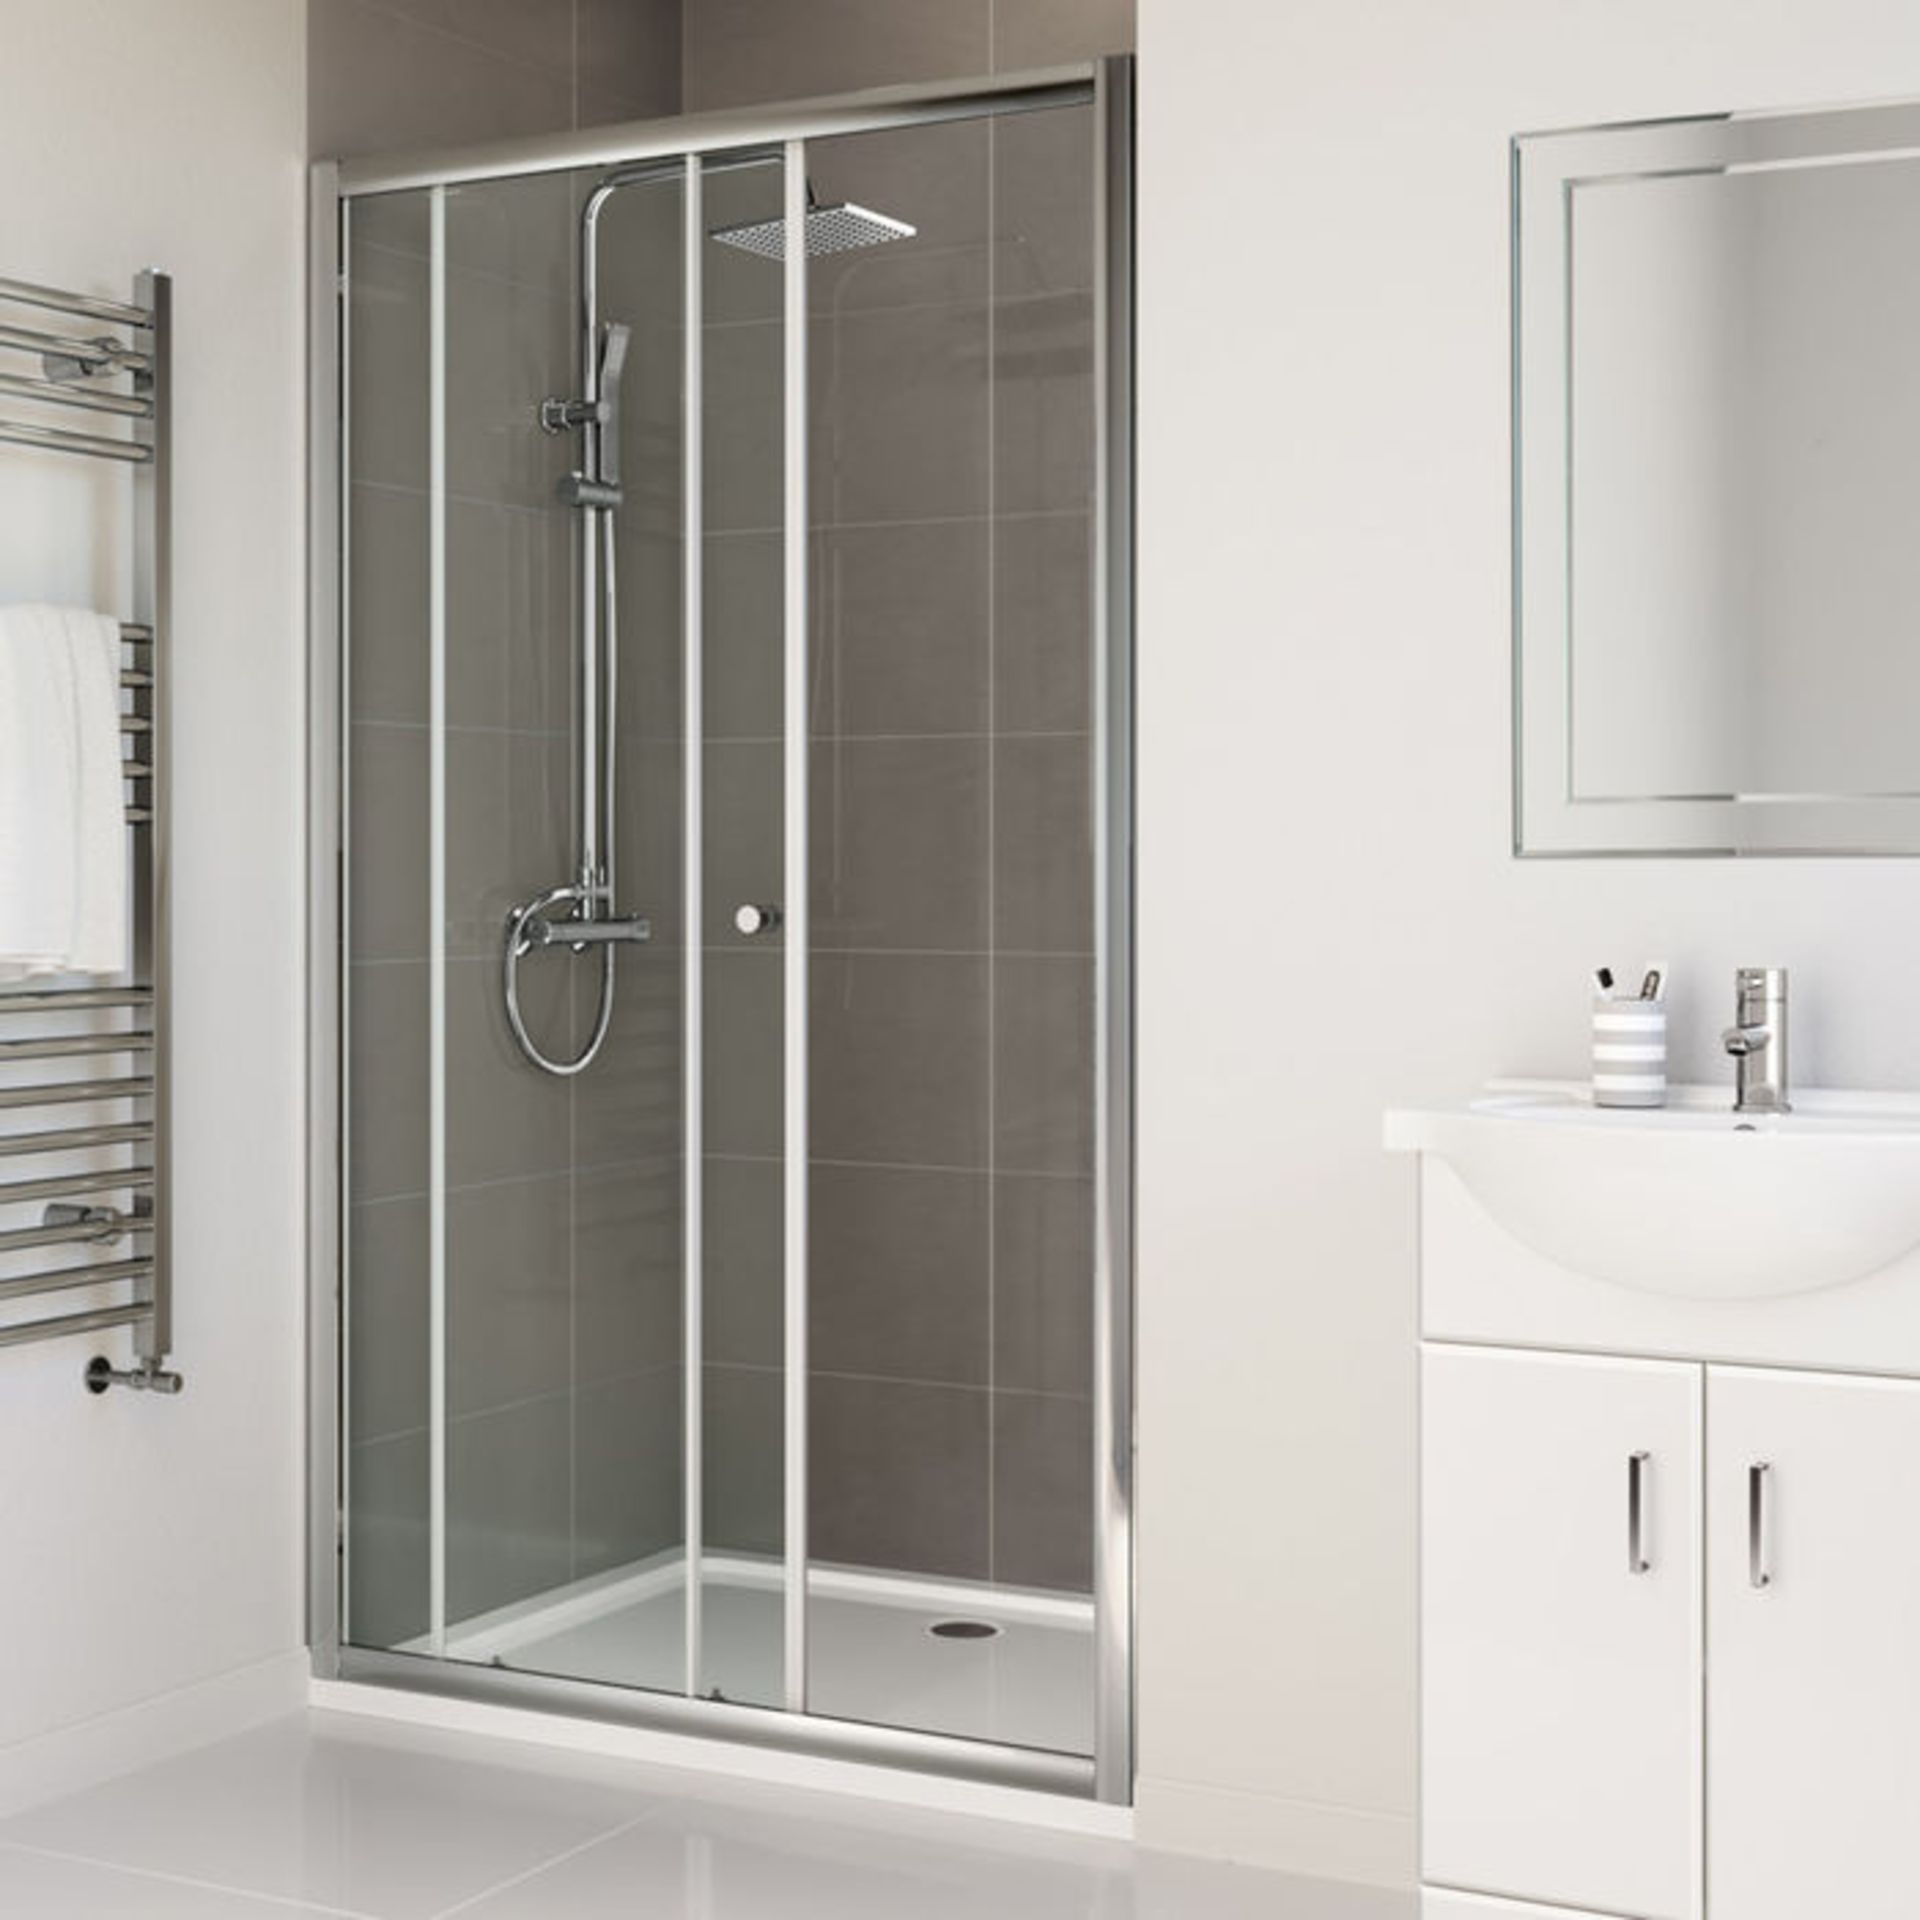 NEW (MF116) 1600mm - Elements Sliding Shower Door. RRP £299.99. 4mm Safety Glass Fully waterpr... - Image 3 of 4